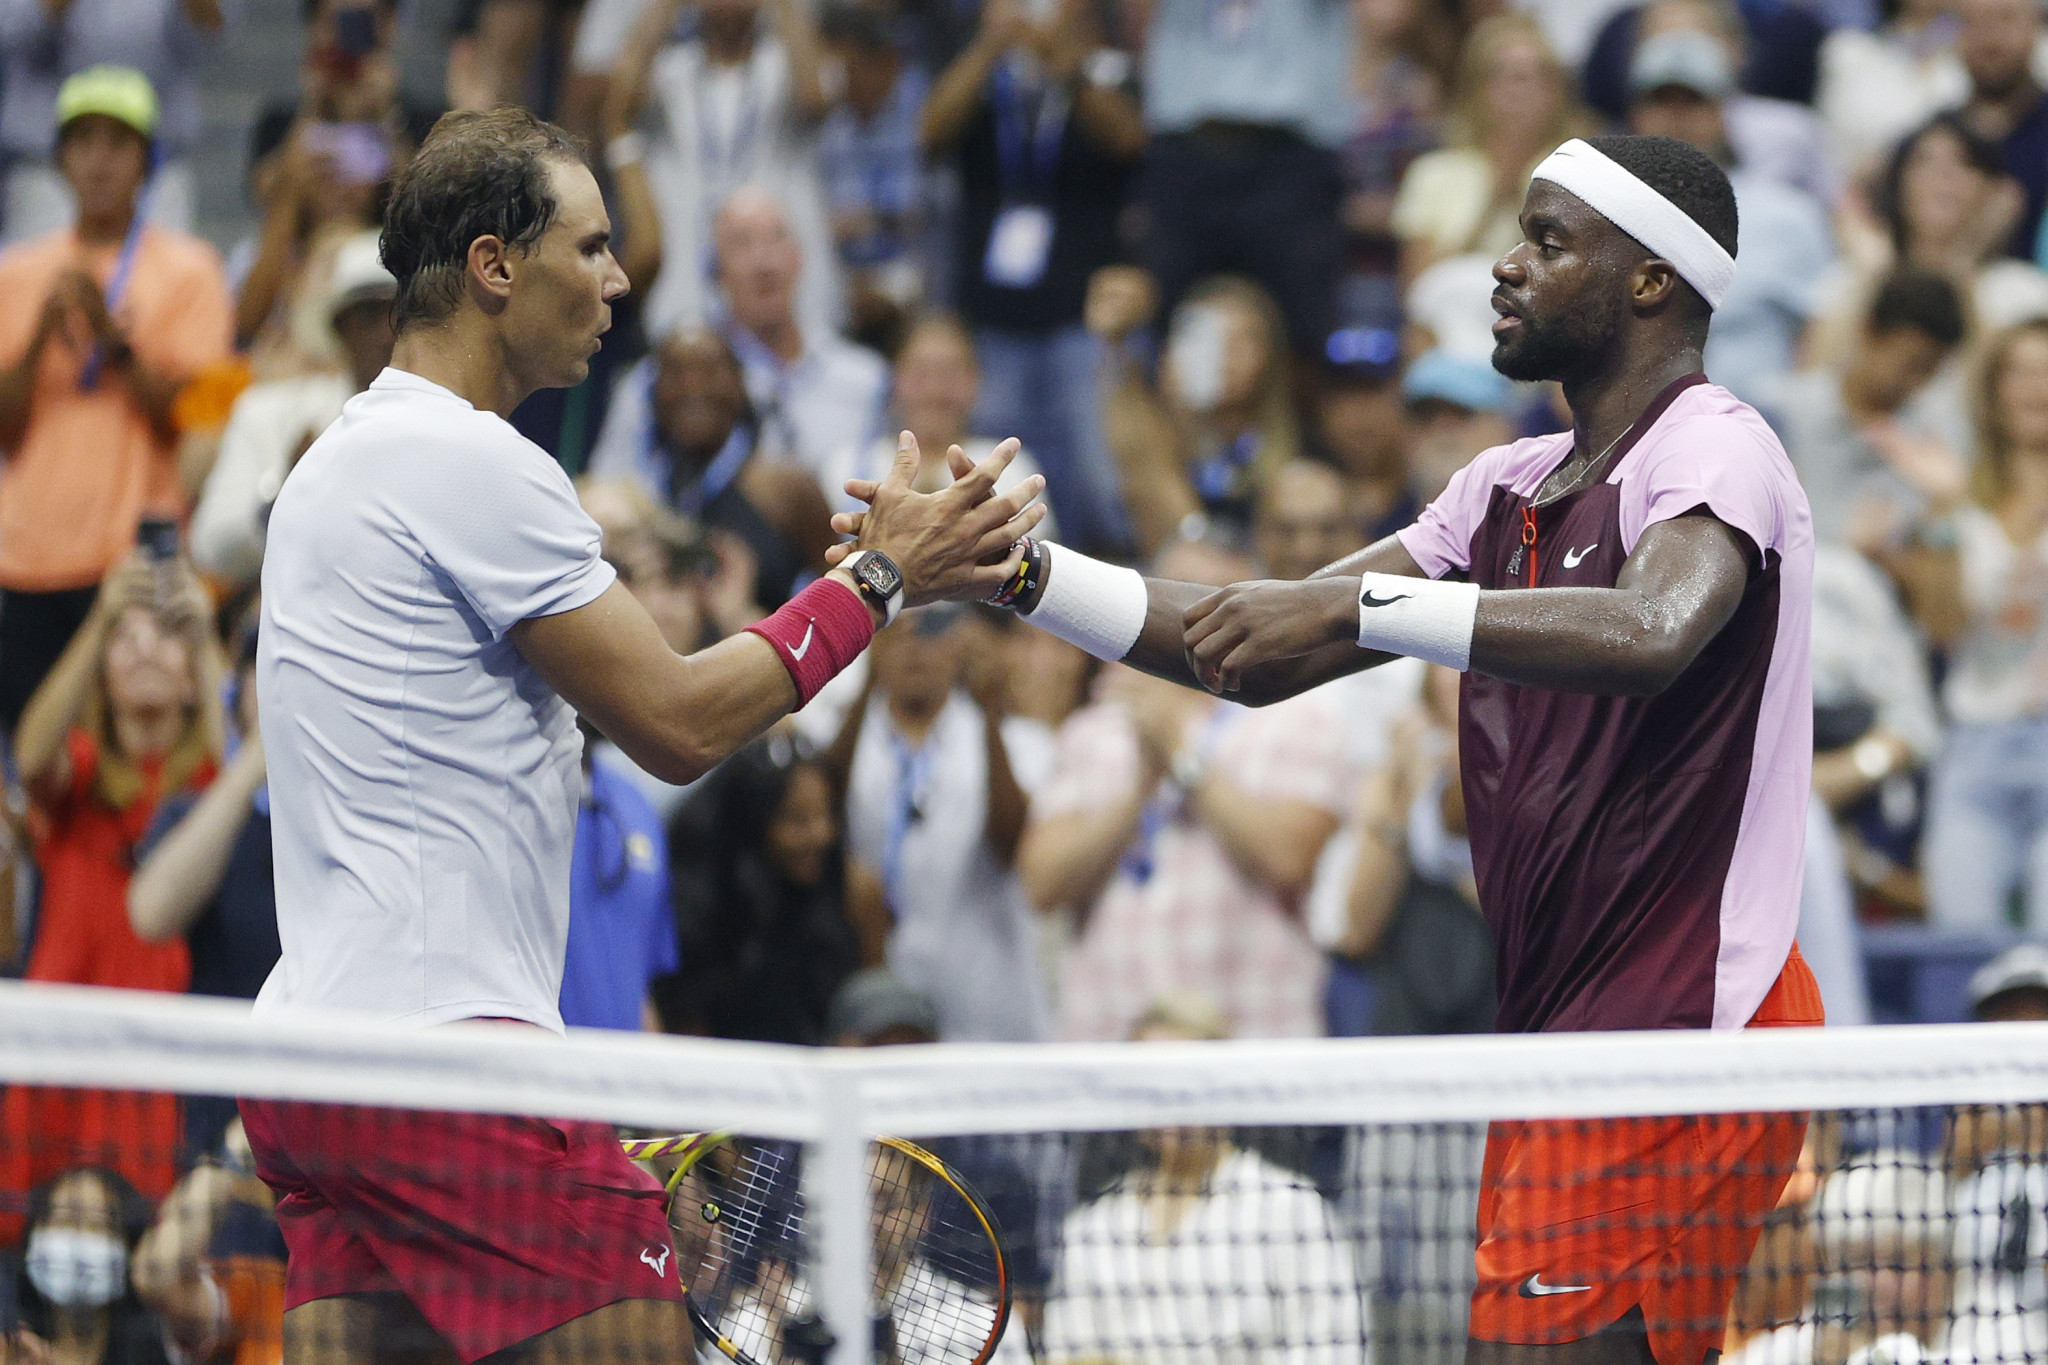 Nadal congratulates Frances Tiafoe who has moved through to the quarter-finals of the US Open for the first time ©Getty Images